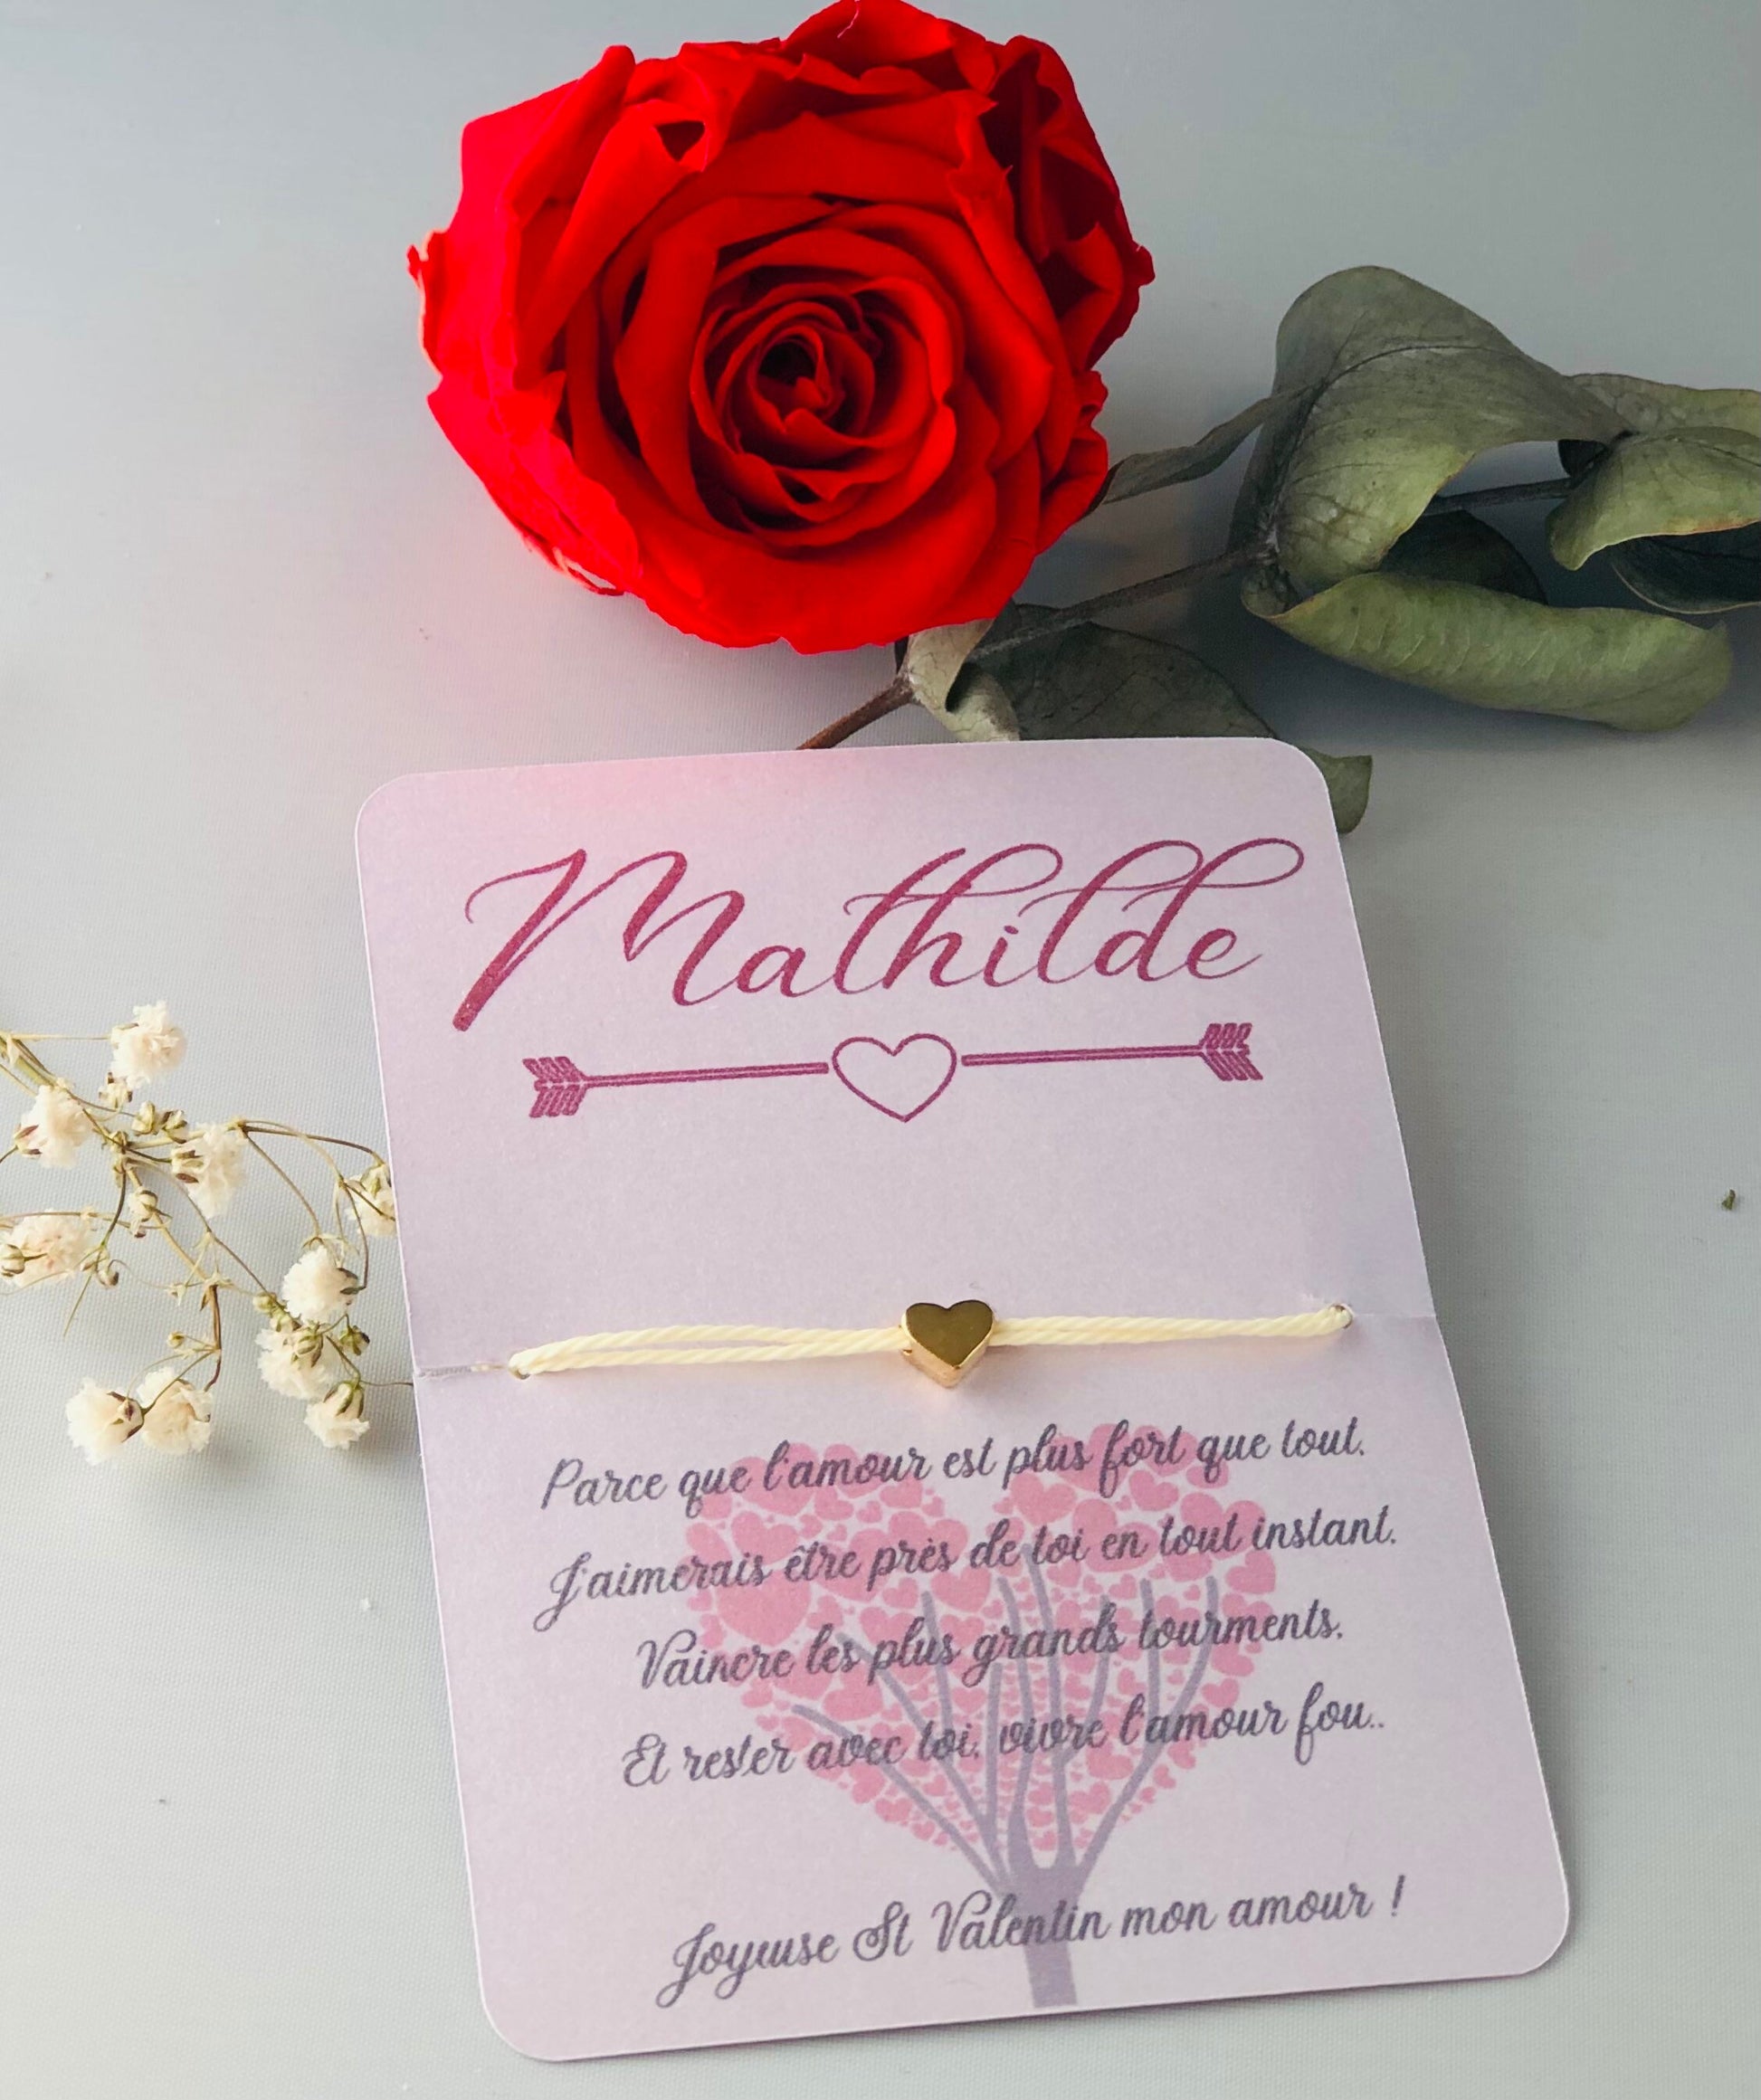 Bracelet and personalized card to offer Valentine's Day and all events